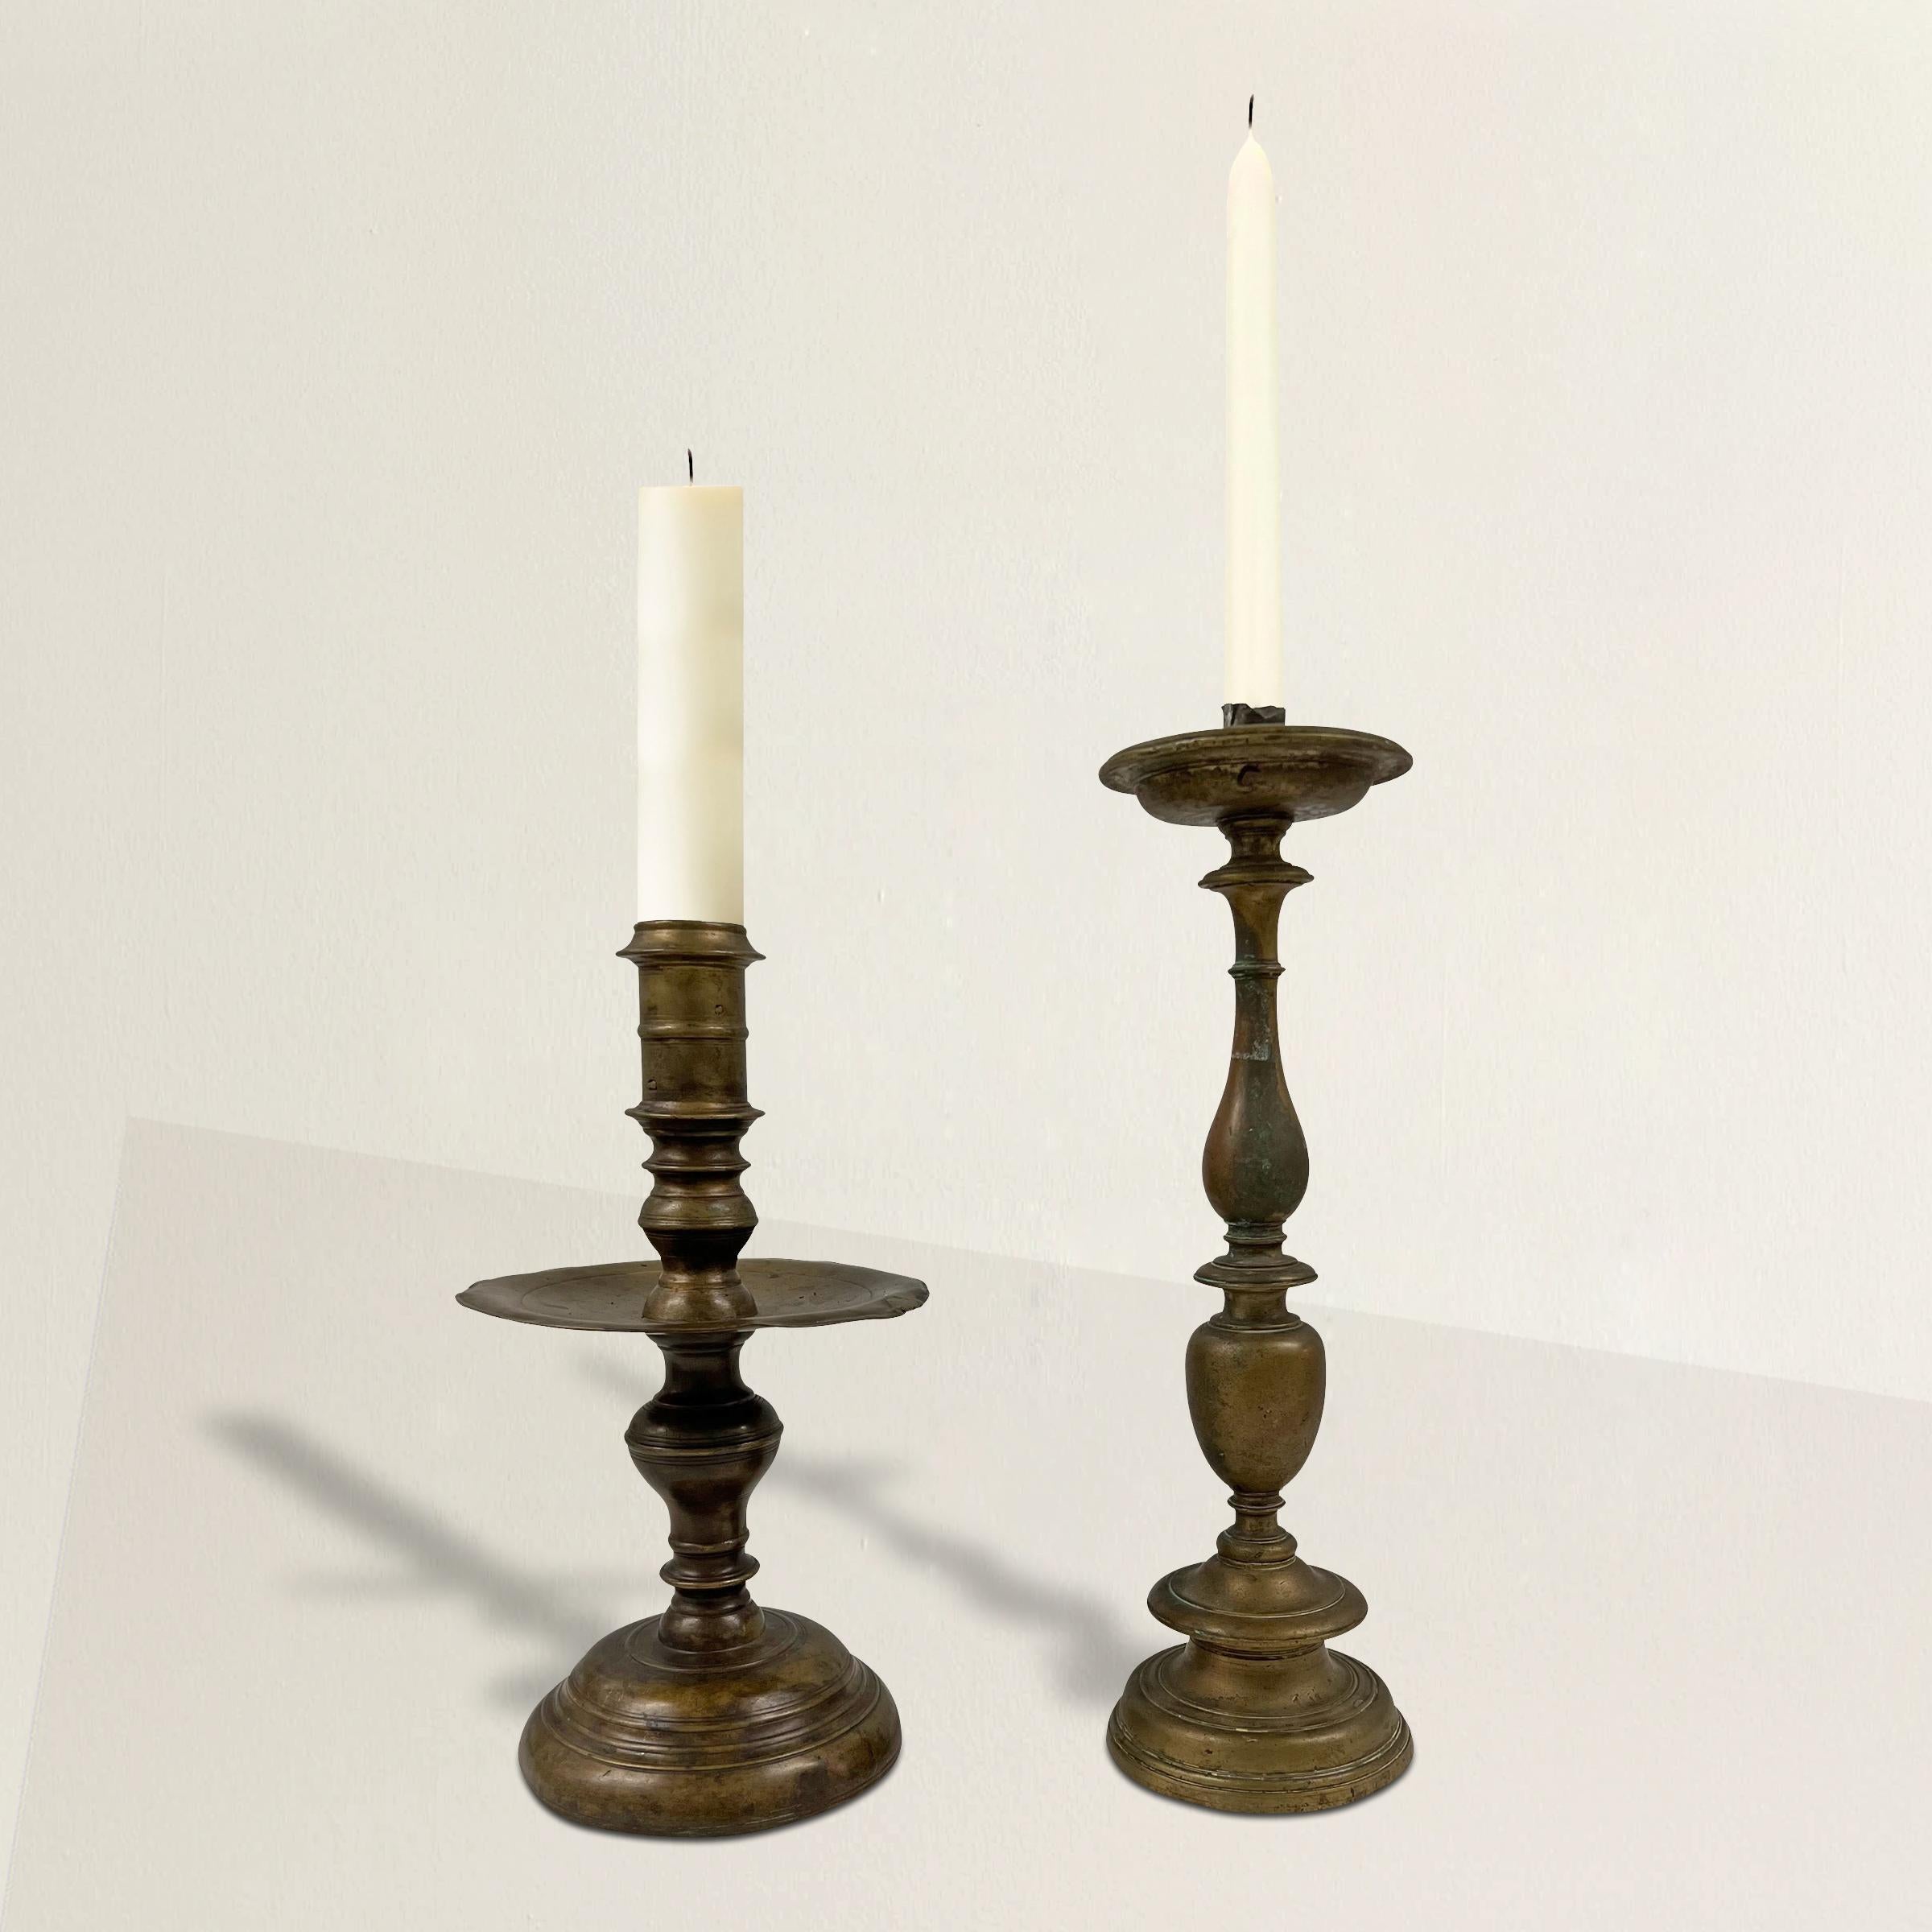 A stunning pair of 17th century Italian Baroque bonze candlesticks with beautifully turned stems. One is a traditional candlestick that holds a taper, and the other is a pricket that holds a larger pillar candle.